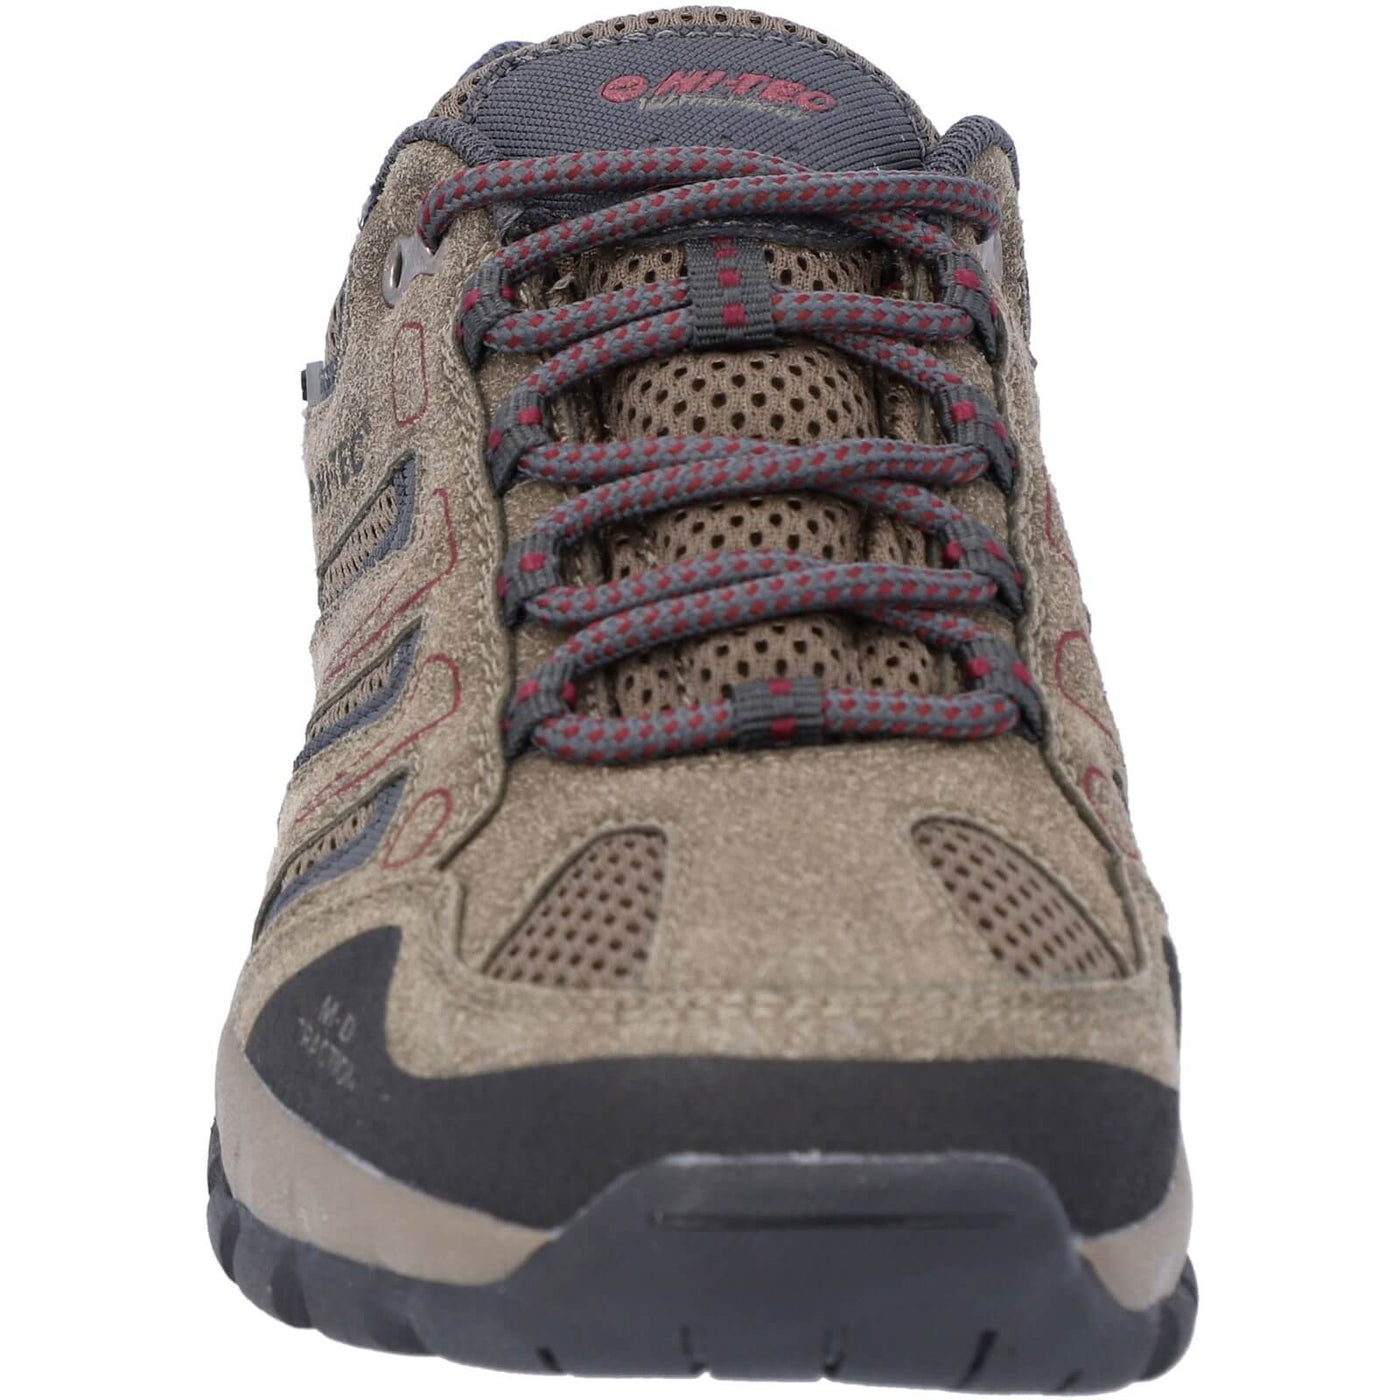 Hi-Tec Torca Low Lightweight Waterproof Hiking Boots Dark Taupe/Charcoal 3#colour_dark-taupe-charcoal